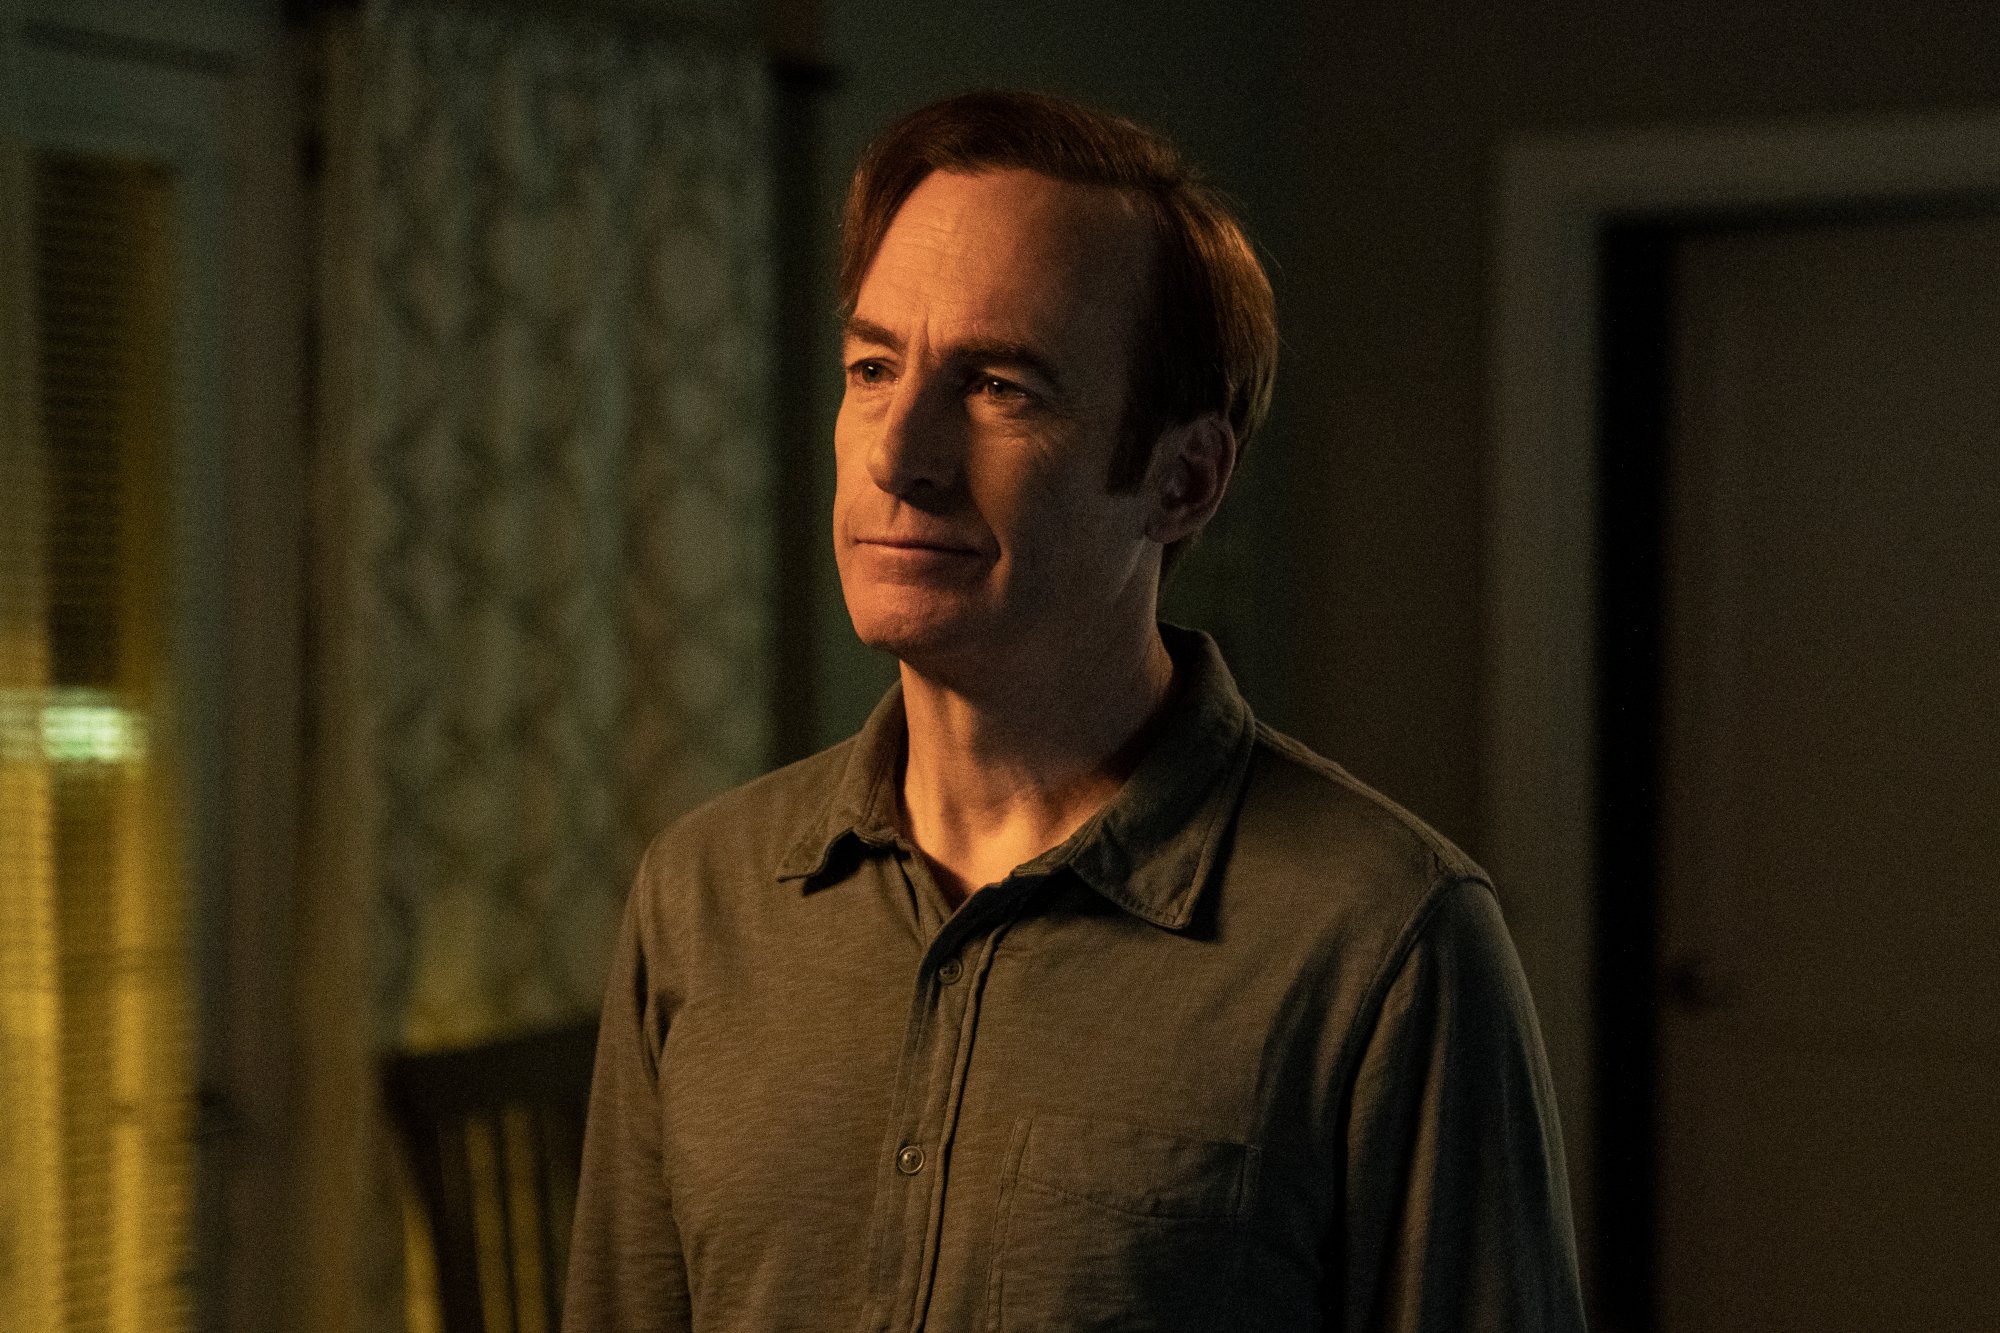 Bob Odenkirk as Saul Goodman in 'Better Call Saul' Season 6 Episode 7, which kills off Howard Hamlin. He's standing in a dimly lit room and wearing a brown shirt.